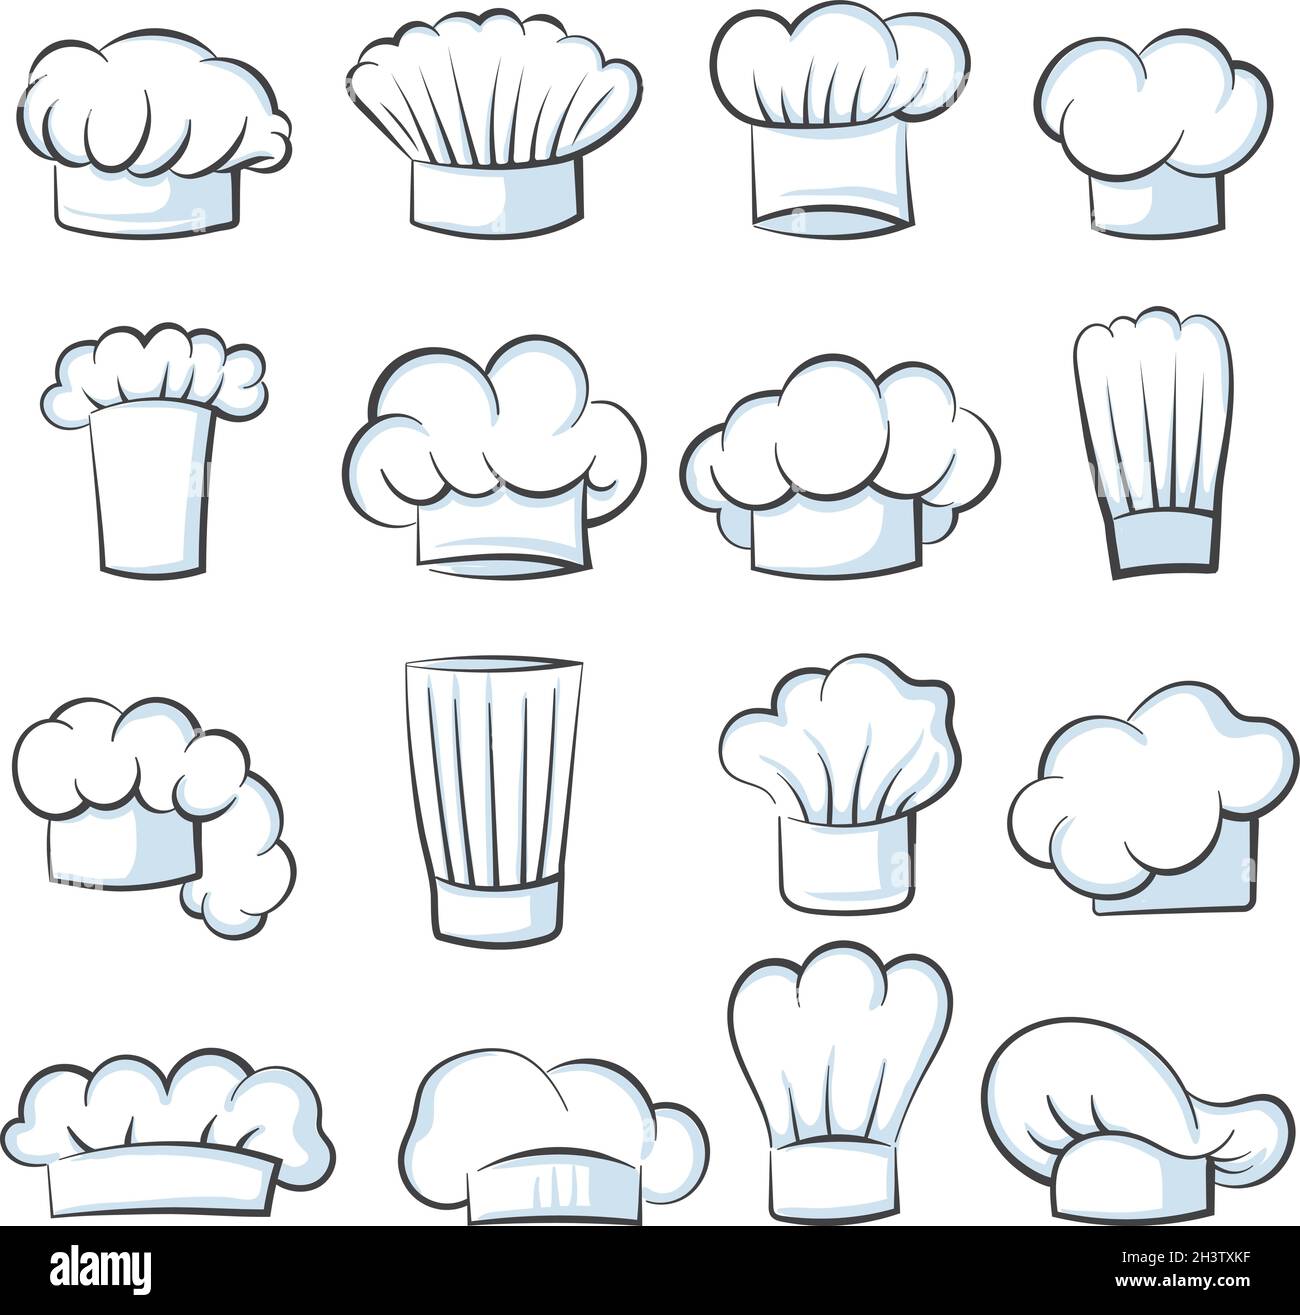 White cook hat. Chef cap drawing clothes cooking symbols vector illustration set isolated Stock Vector